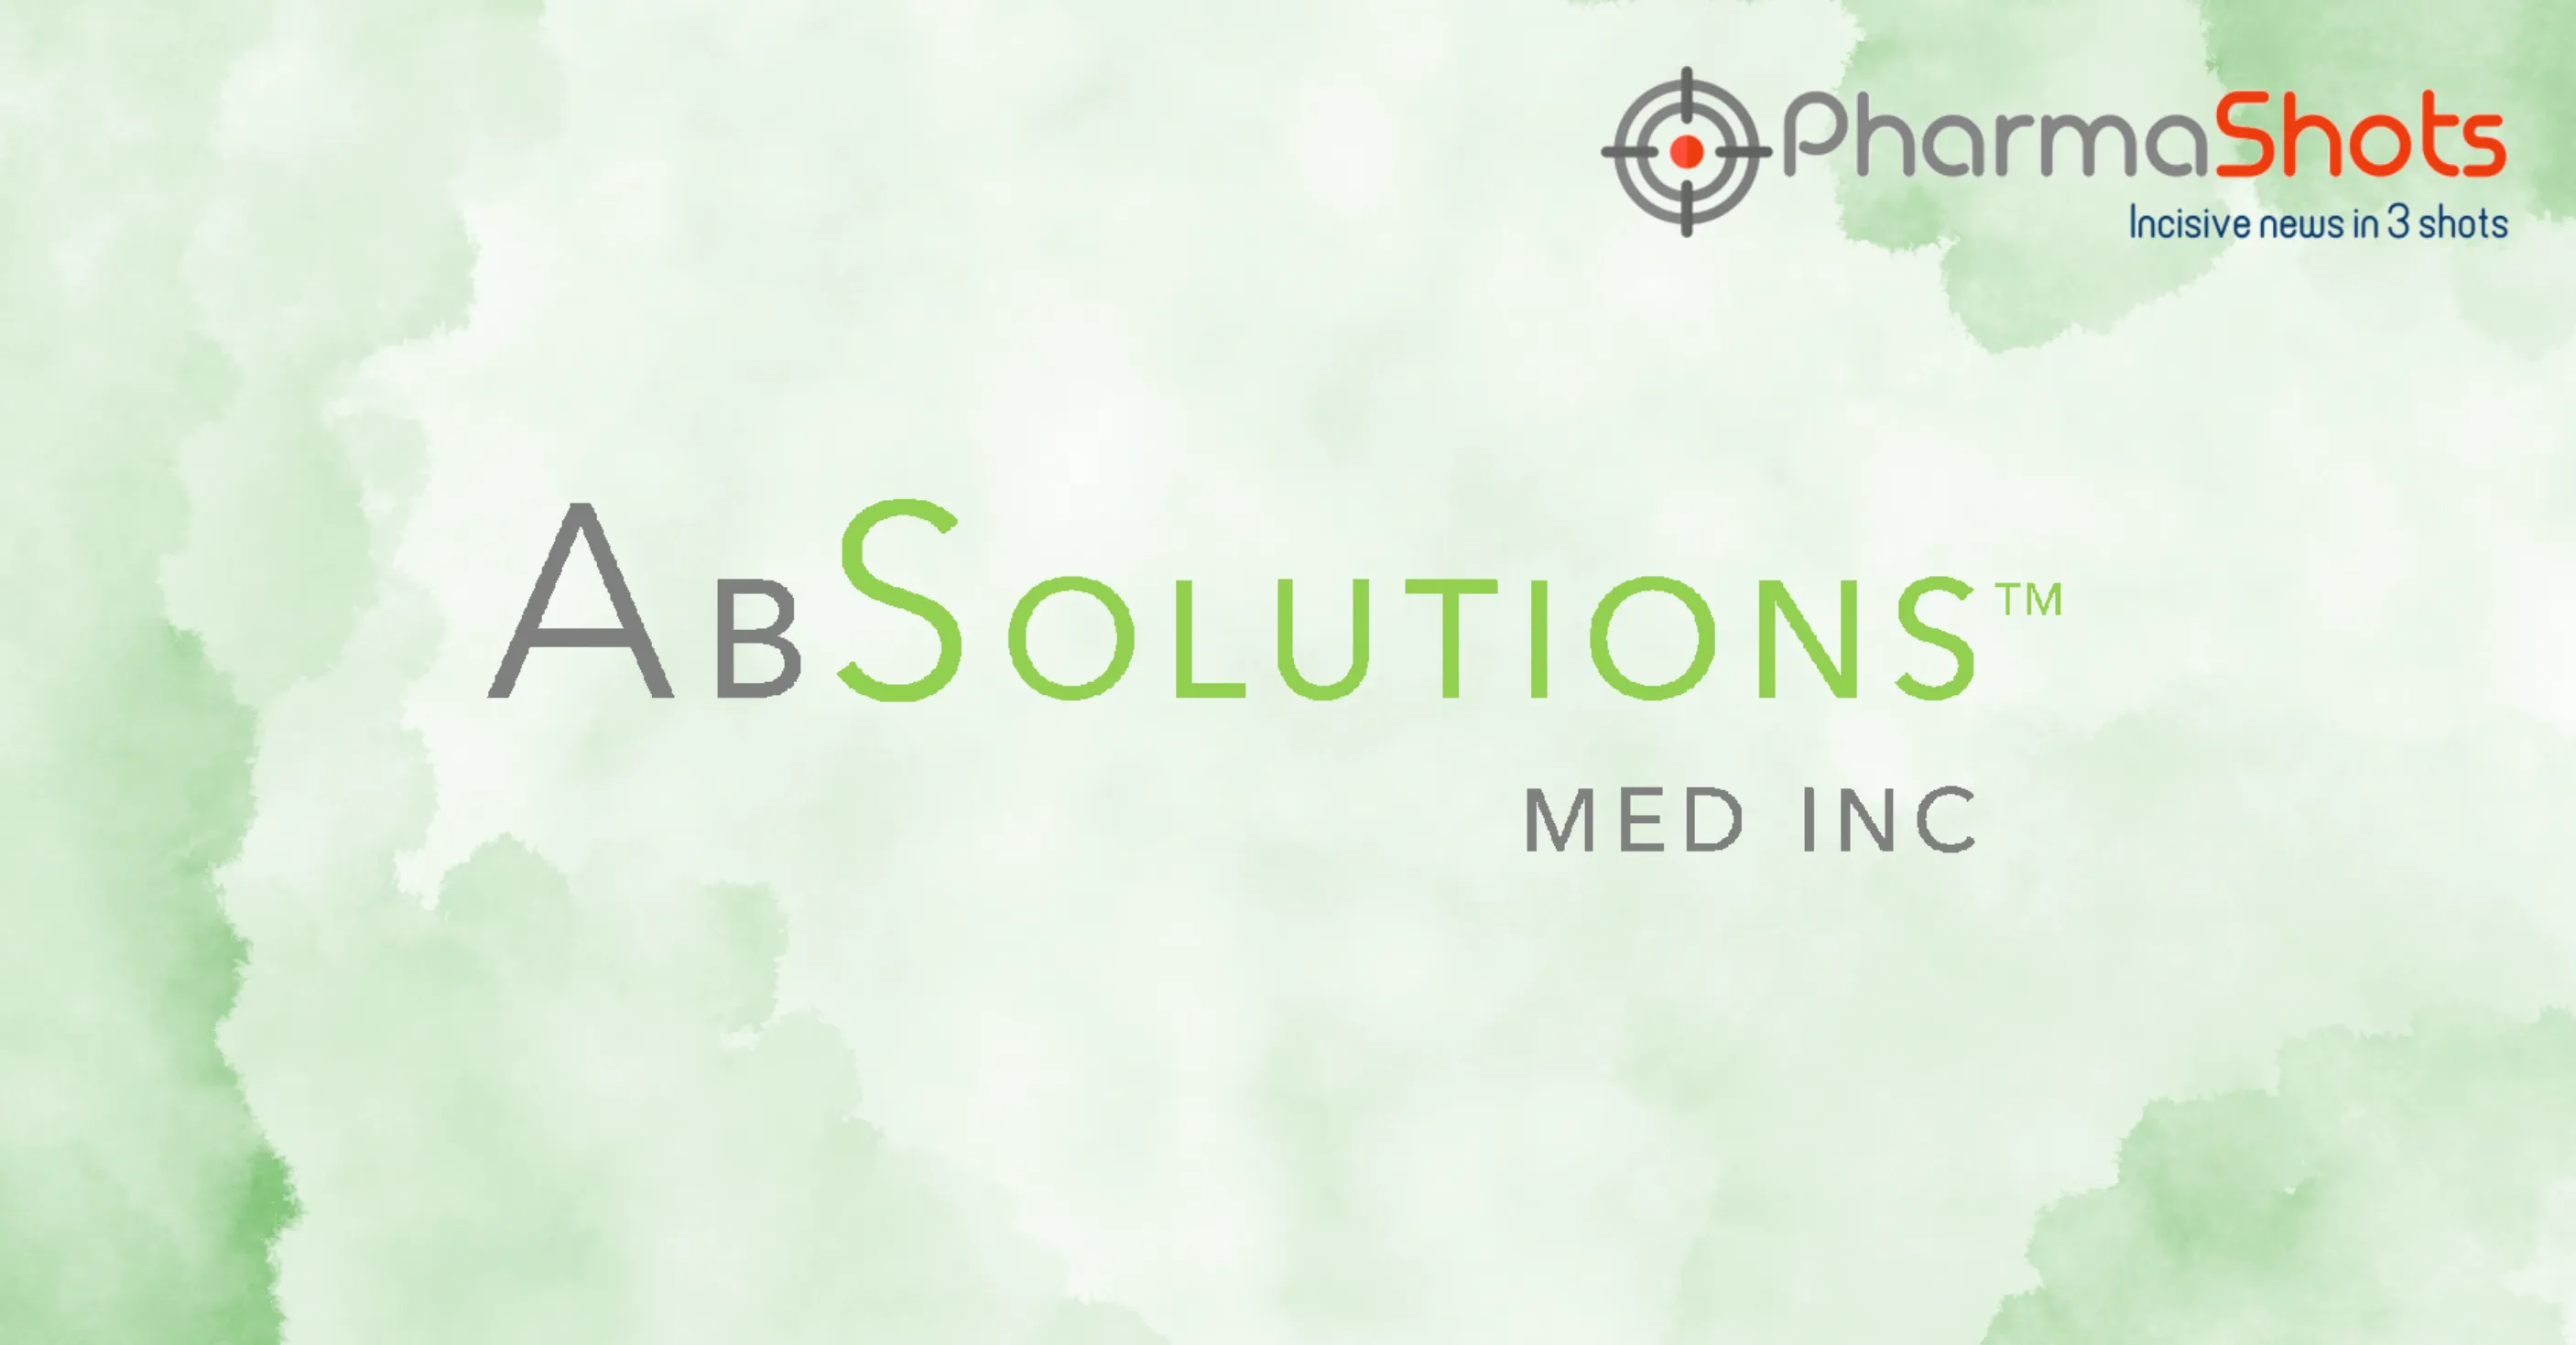 The US FDA Grants Breakthrough Device Designation to AbSolutions Med’s Rebuild Bioabsorbable Abdominal Wall Closure Device for Incisional Hernia